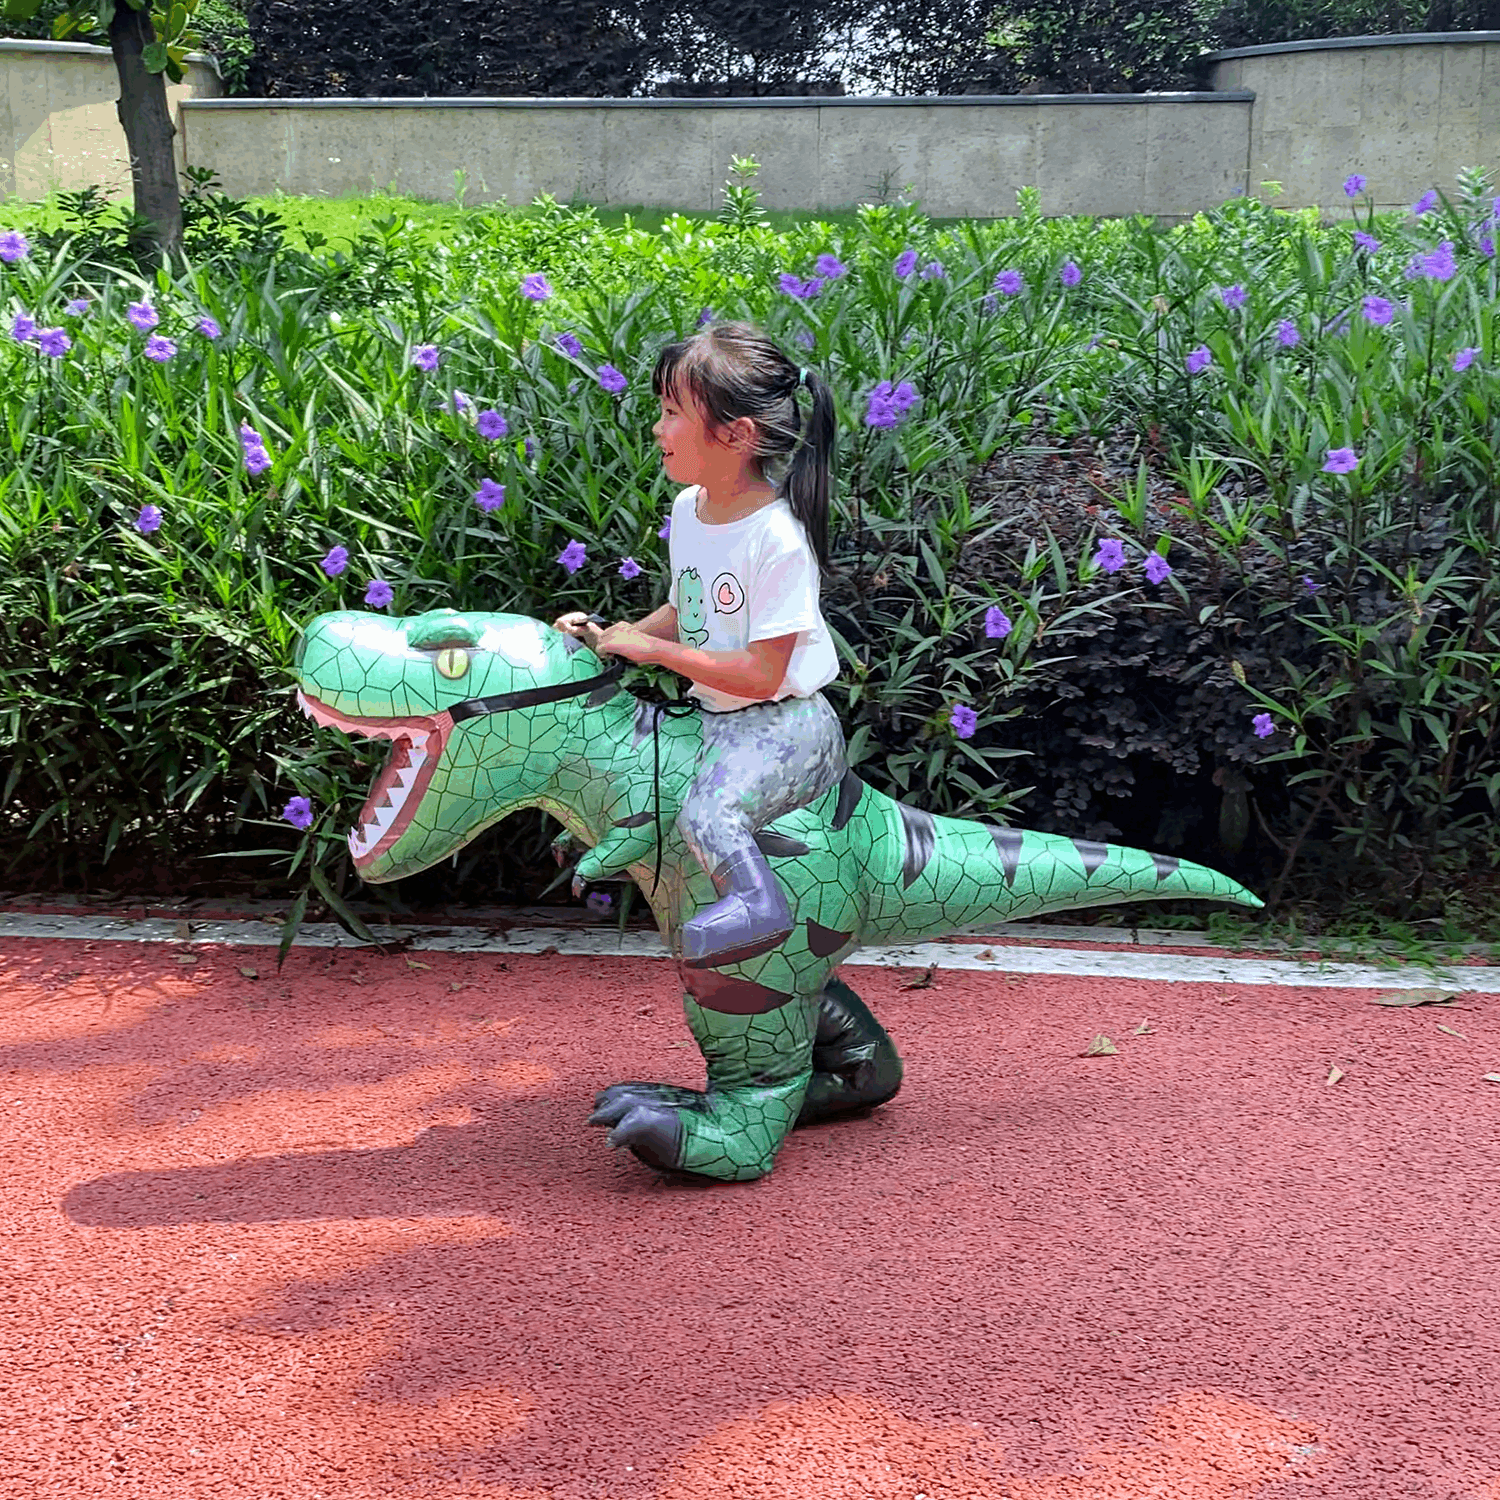 Kids' Inflatable T-Rex Costume